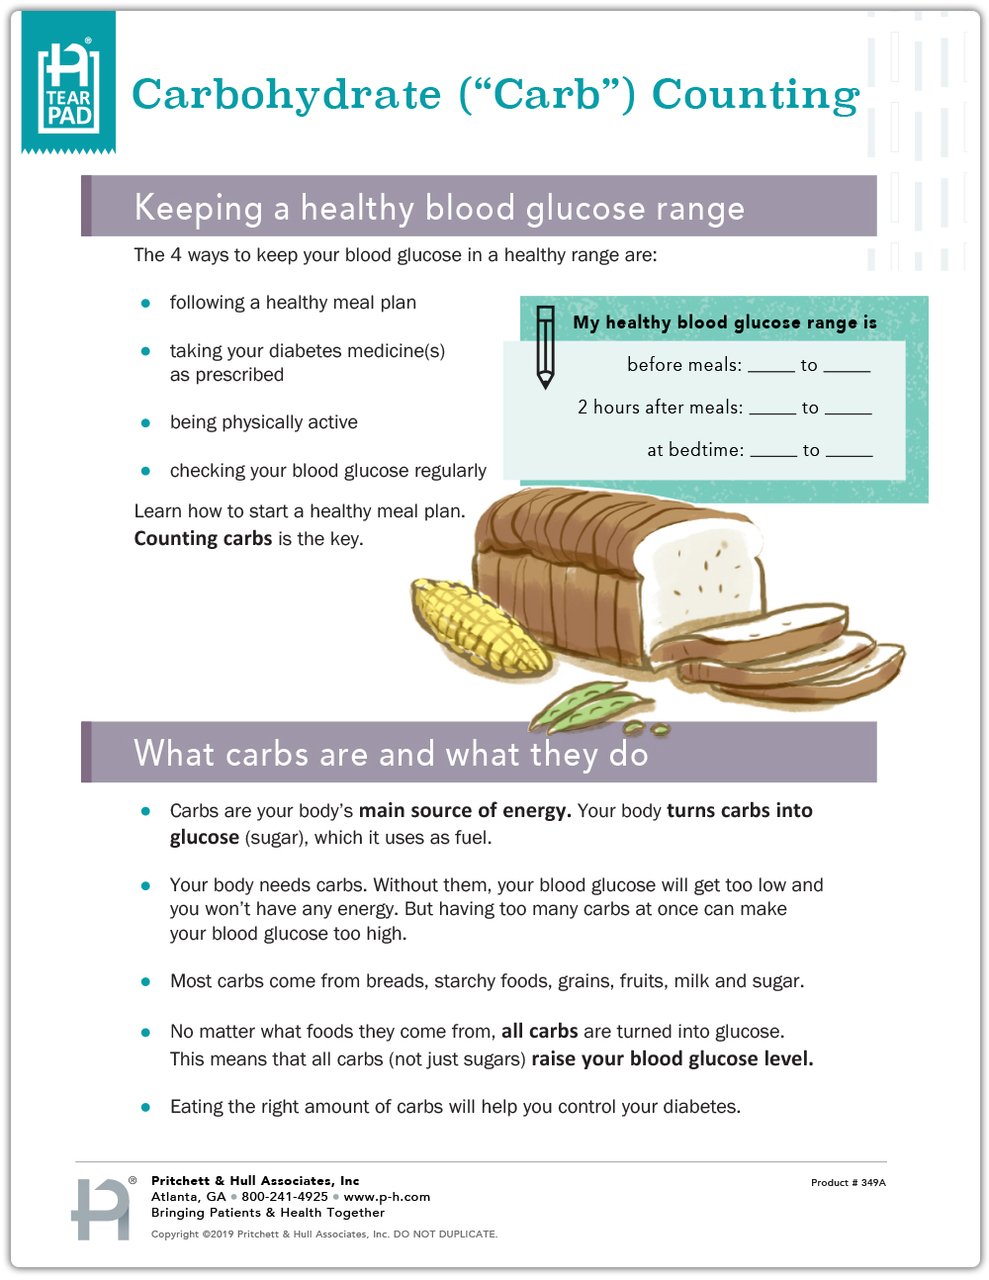 How To Count Carbohydrates For Diabetes